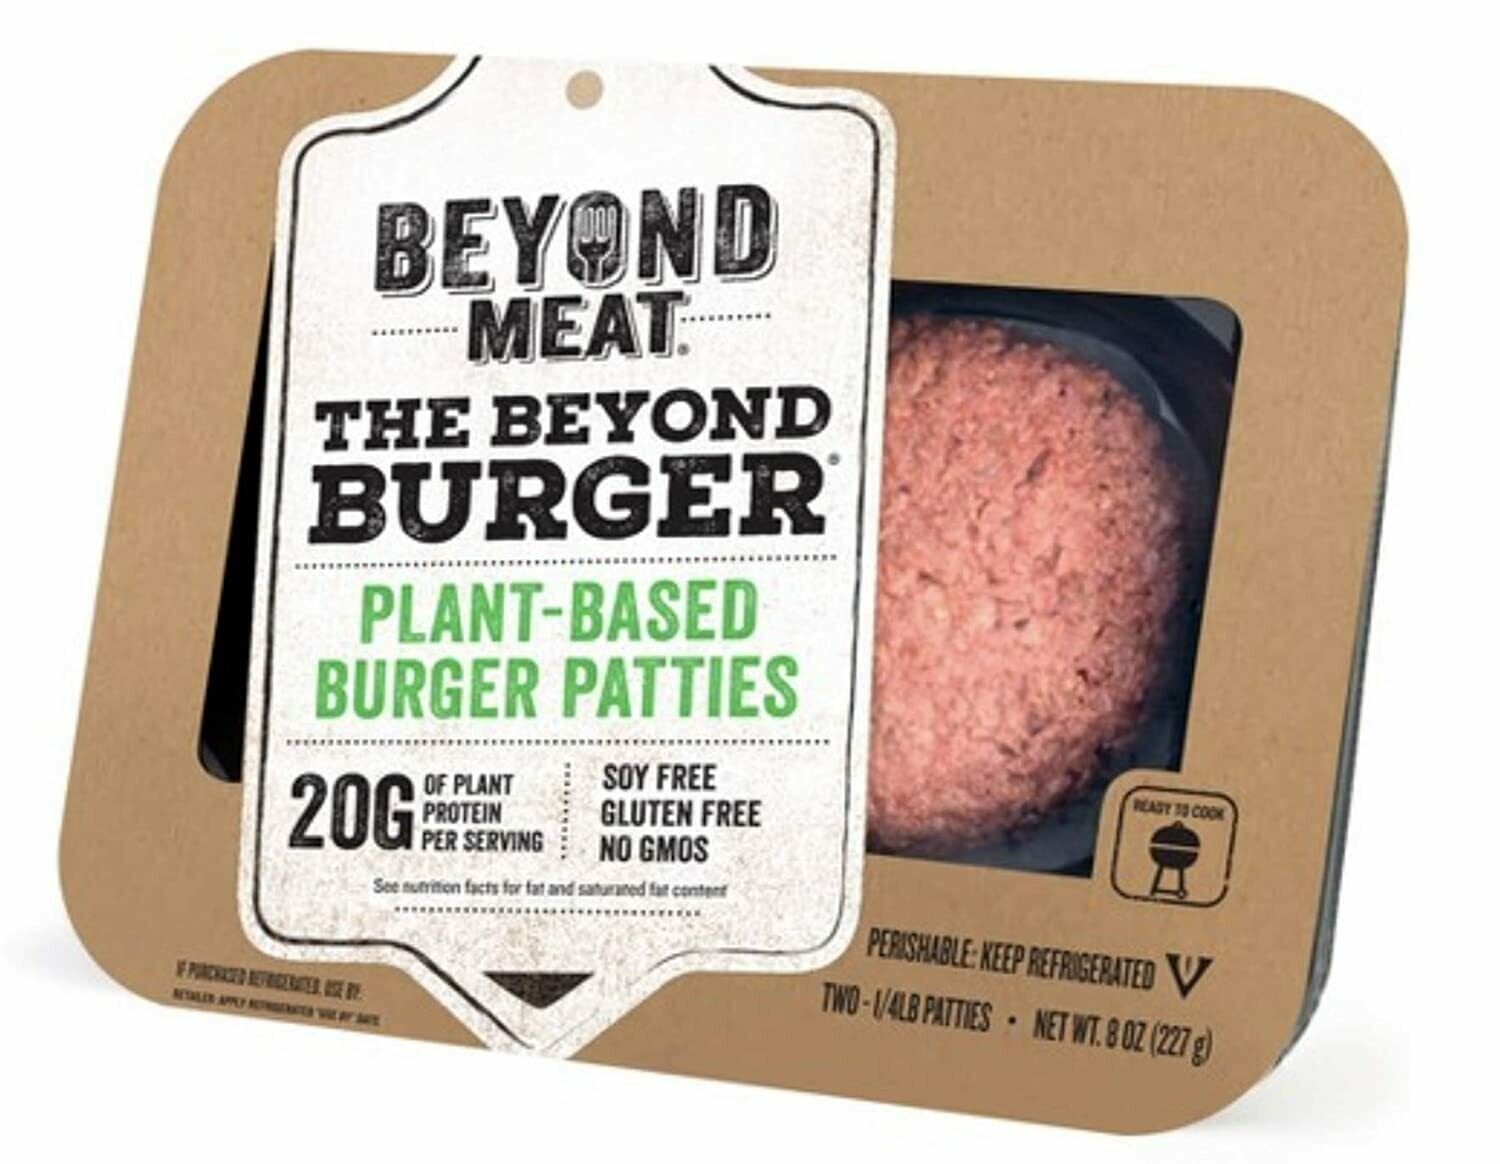 BEYOND MEAT PLANT BASED BURGER TWO 1/4 PATTIES 8 OZ